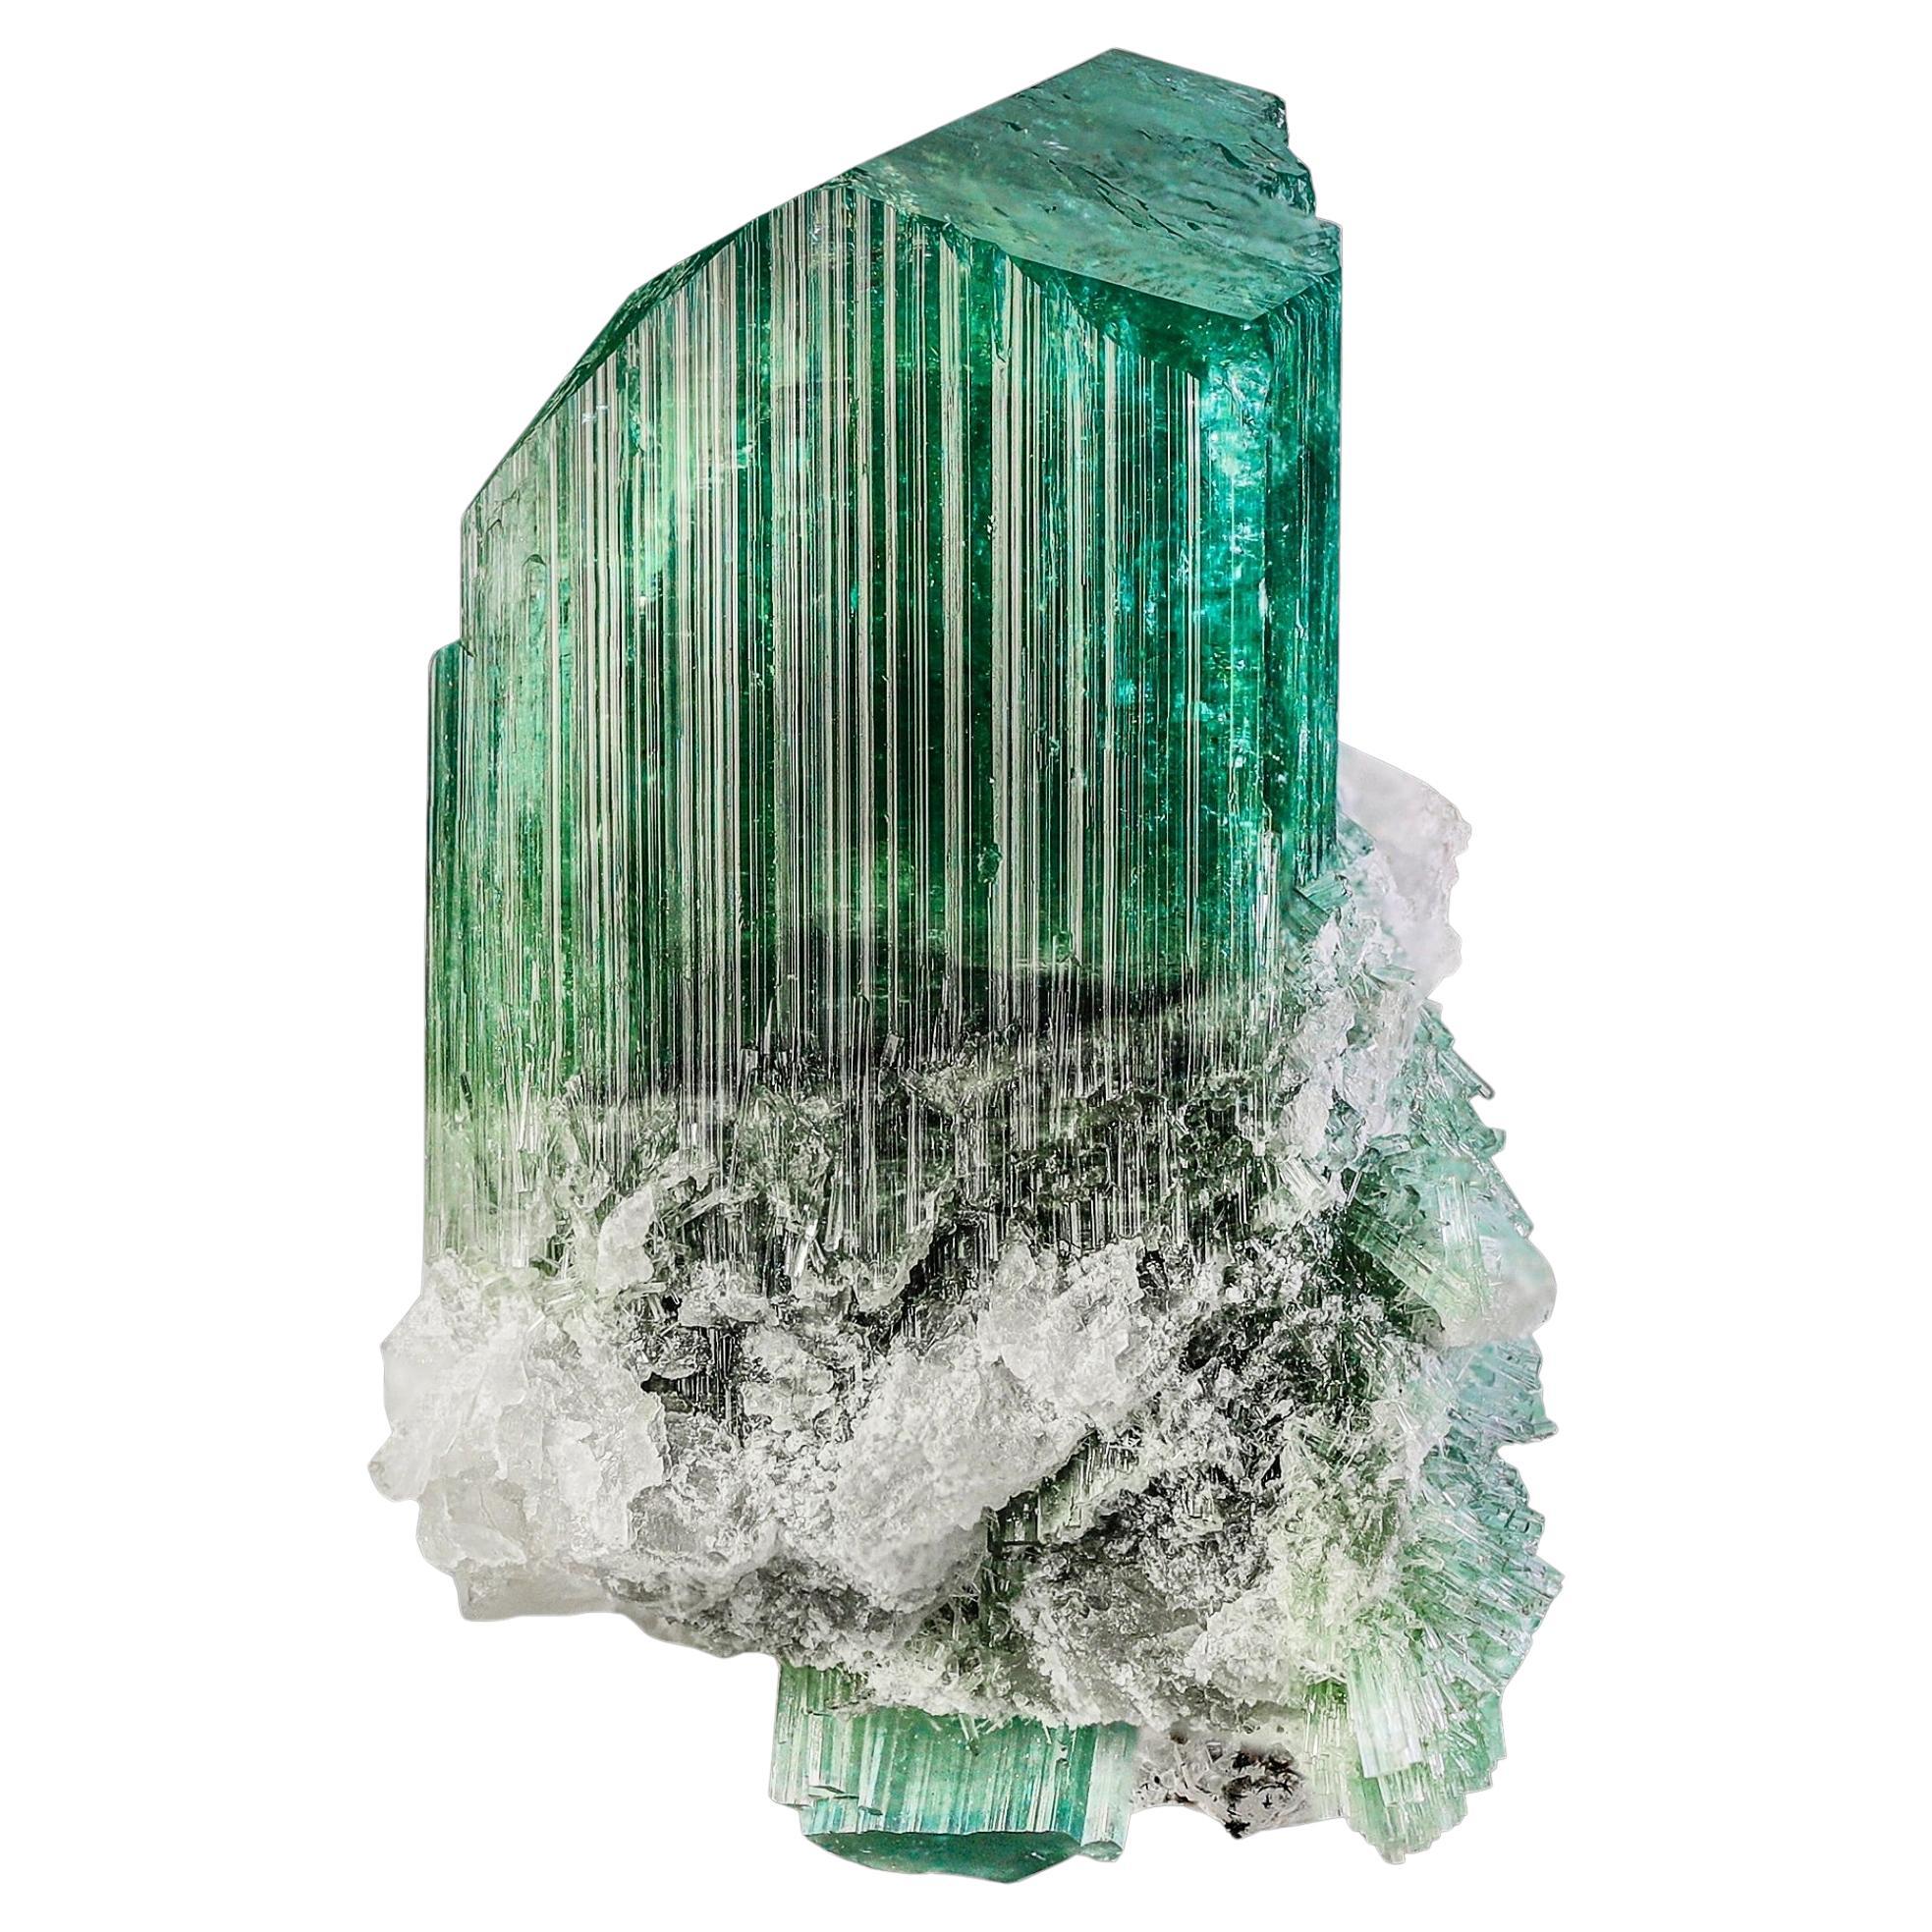 Celestial "New Find" Emerald Green Tourmaline Crystal with White Albite Matrix  For Sale